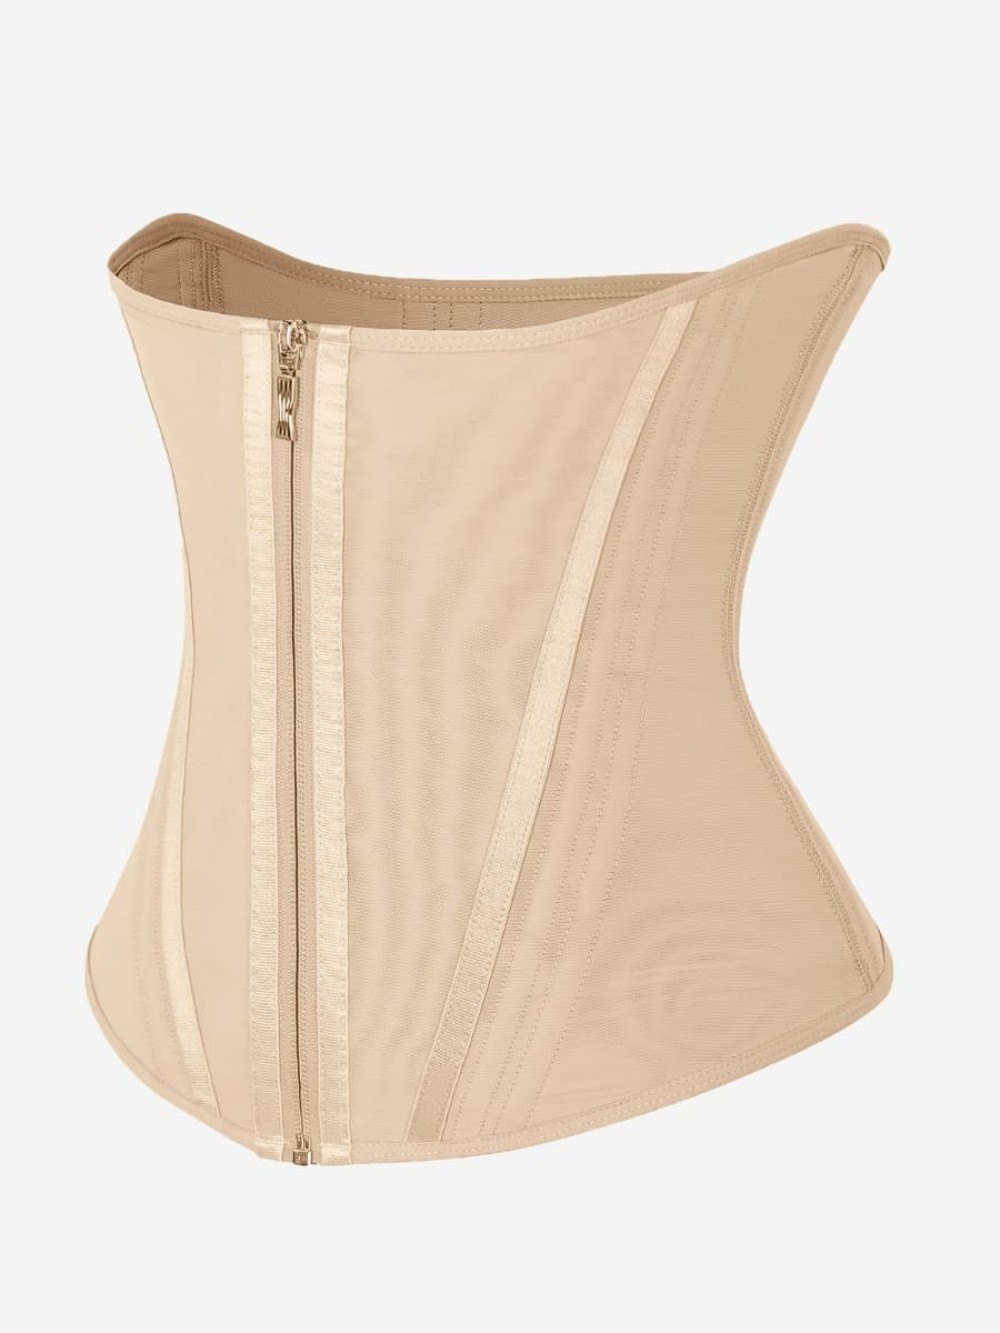 Hourglass Figure Shaping Waist Trainer with 15 Built-in Steel Bone